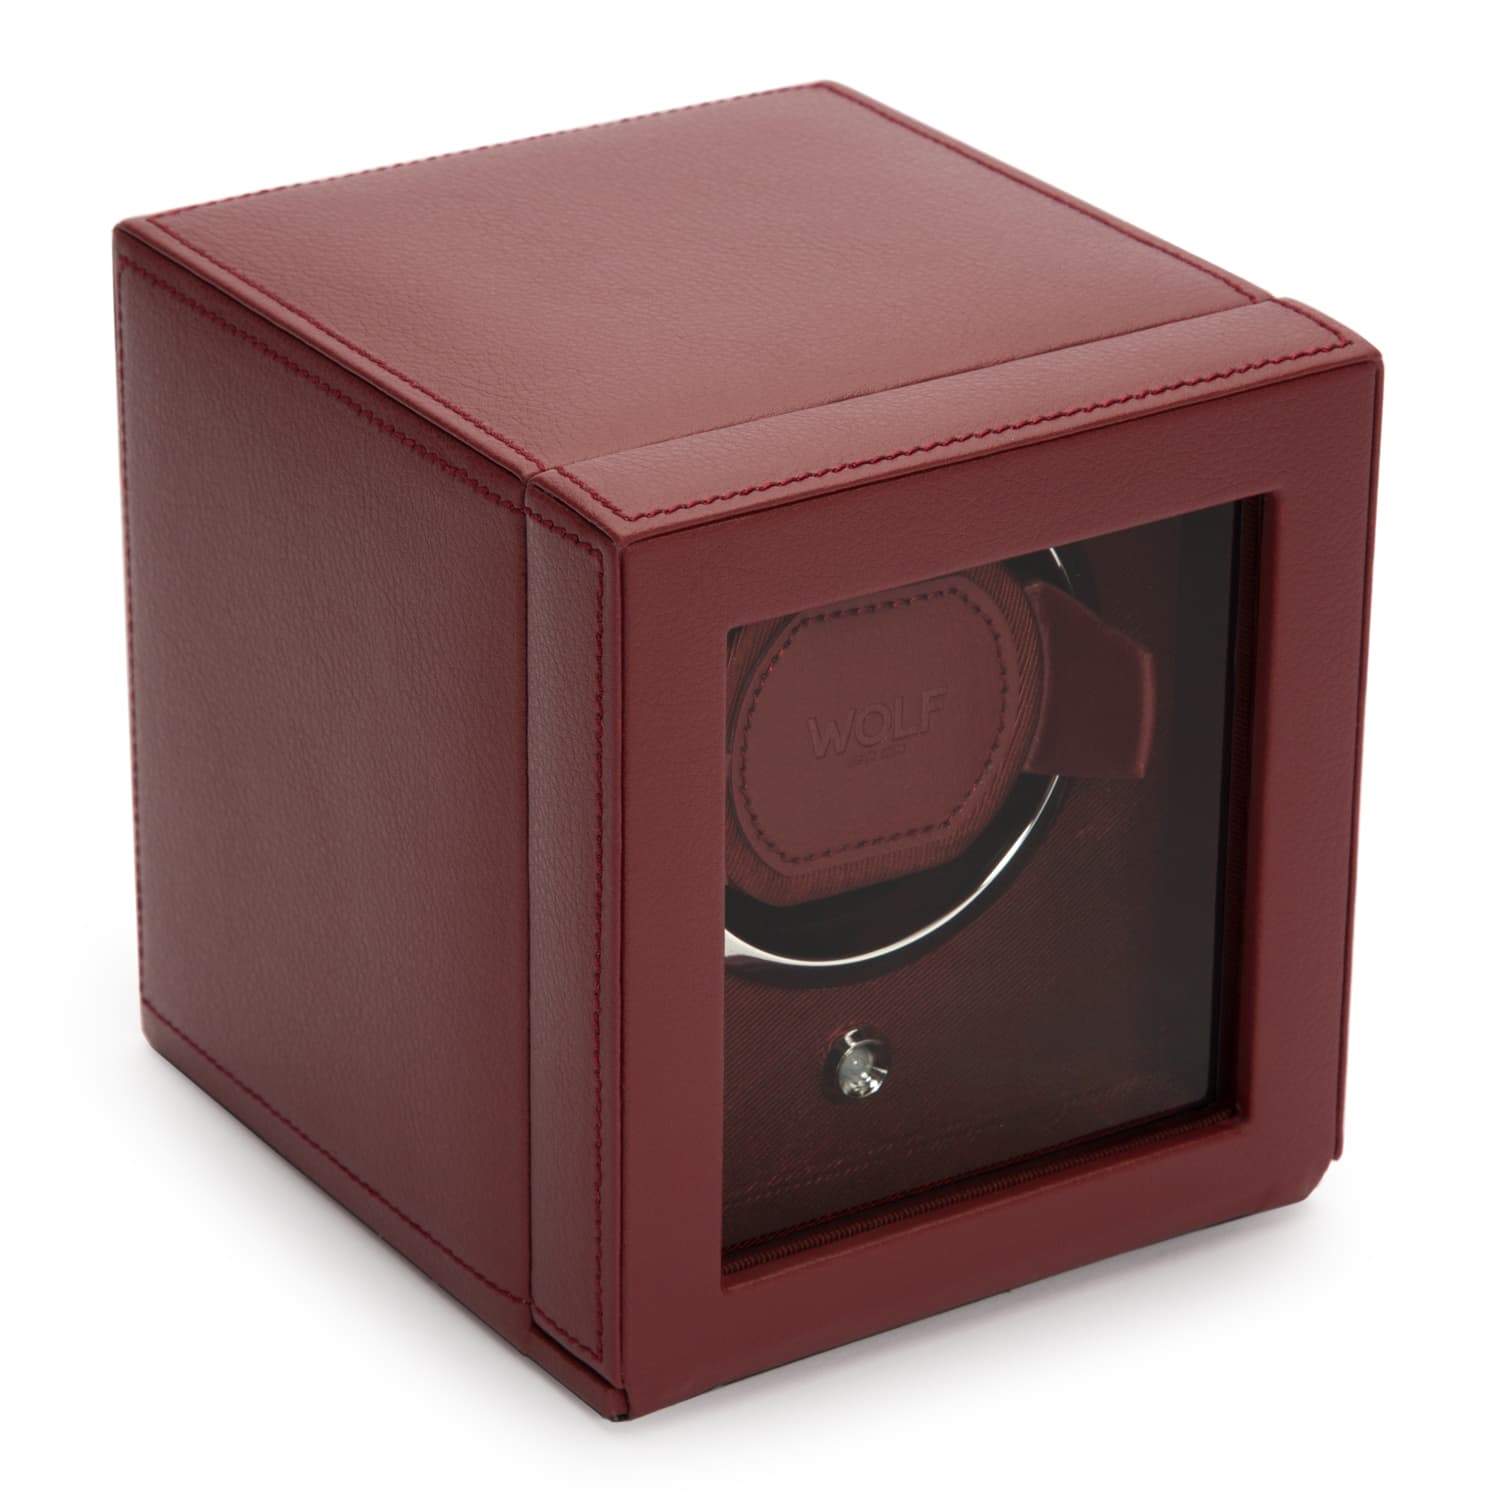 Wolf-Cub-Single-Watch-Winder-with-Cover-Bordeaux-461126-1